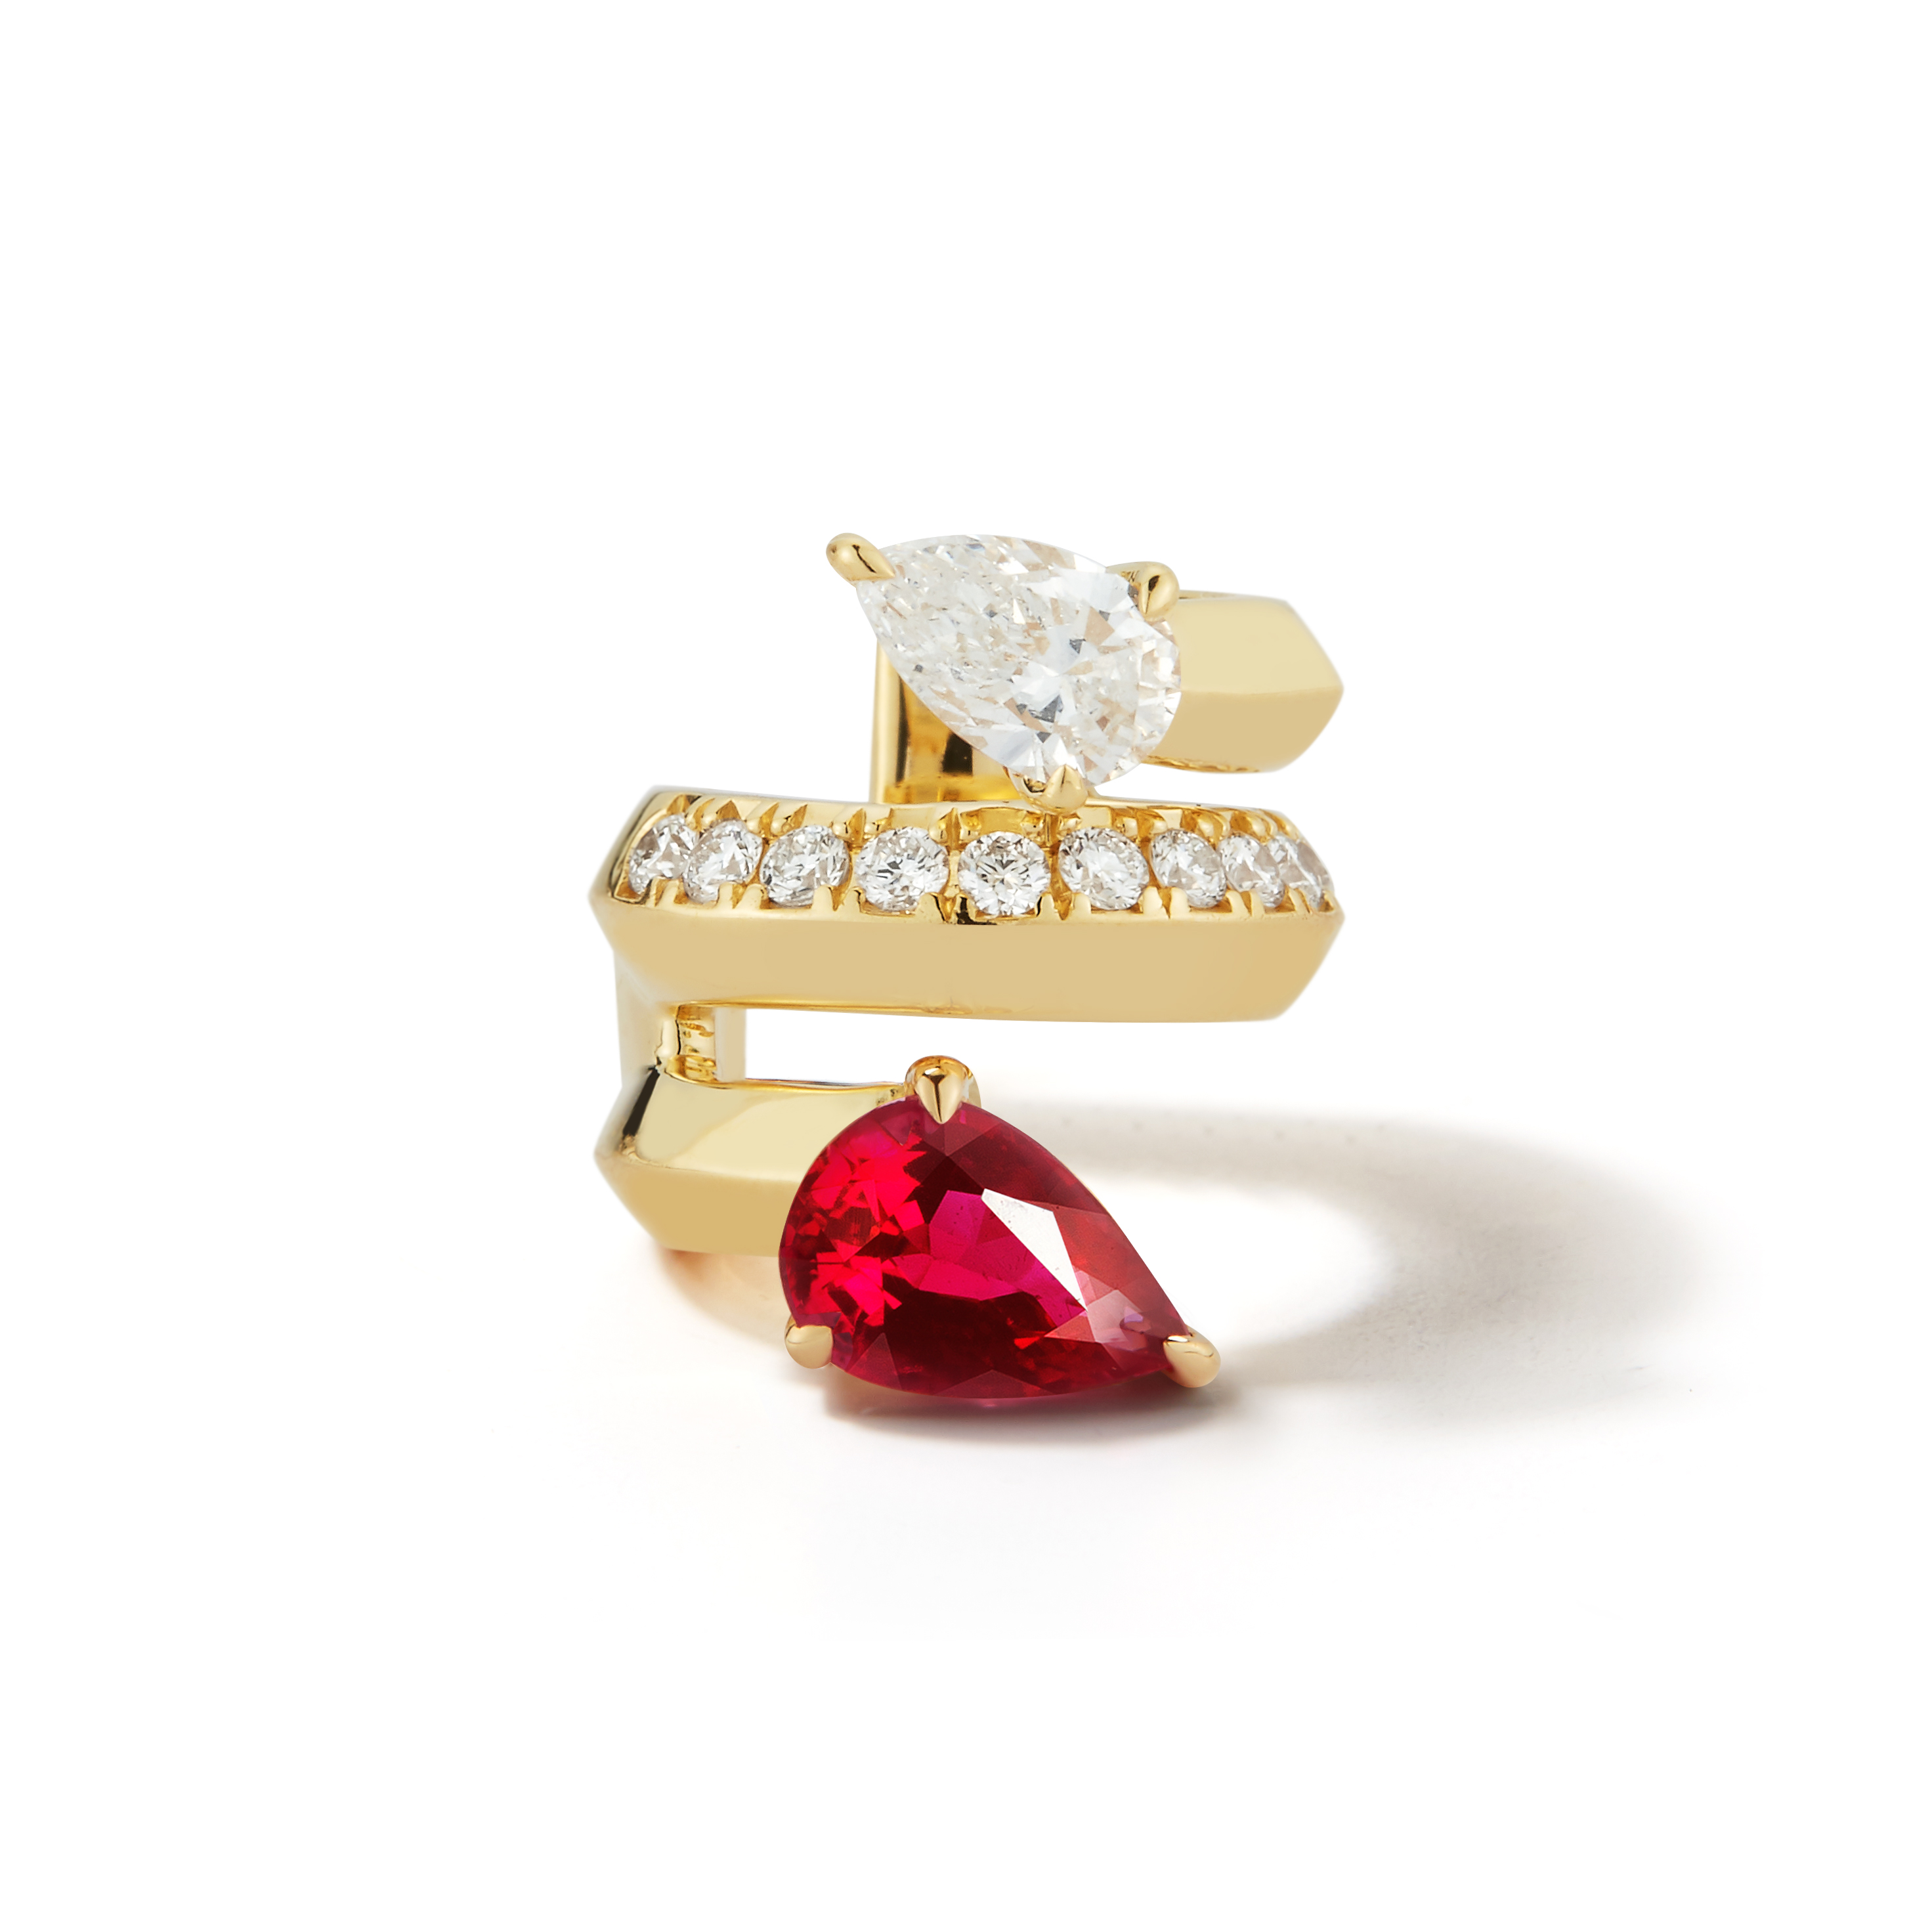 Rival Ruby Ear Cuff by Valani. 18K Gold